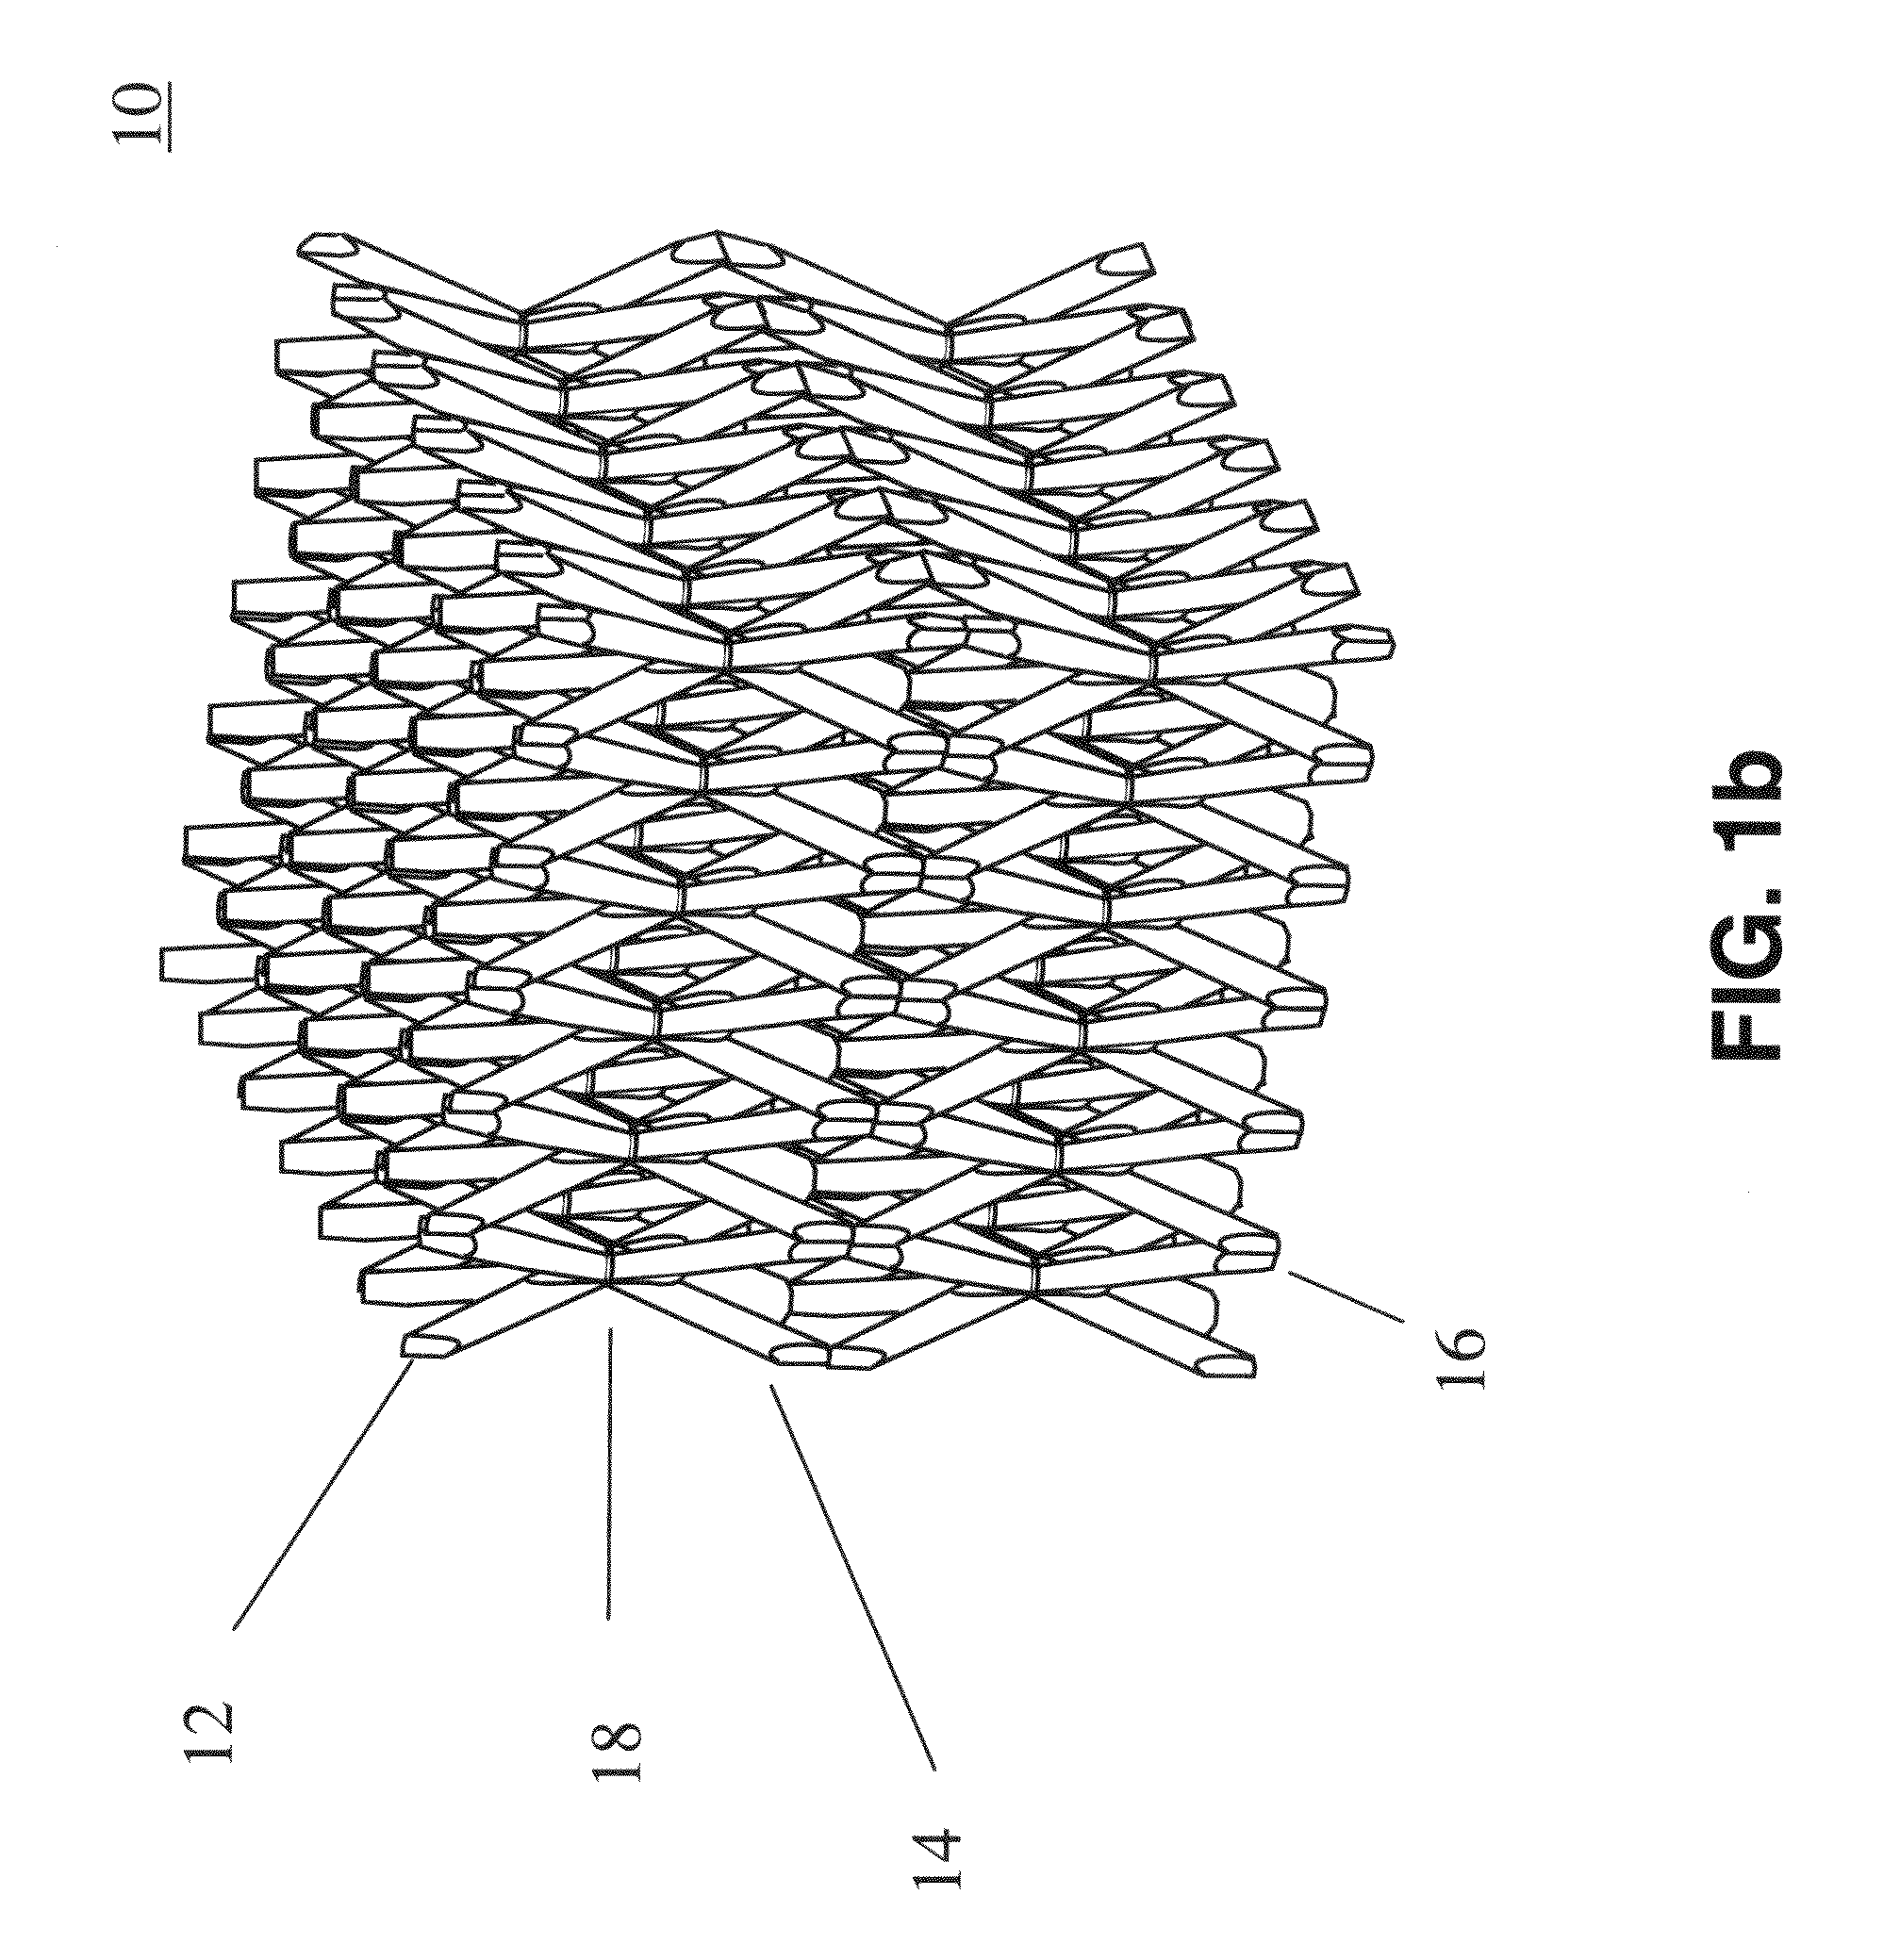 Methods and apparatus for increasing biofilm formation and power output in microbial fuel cells